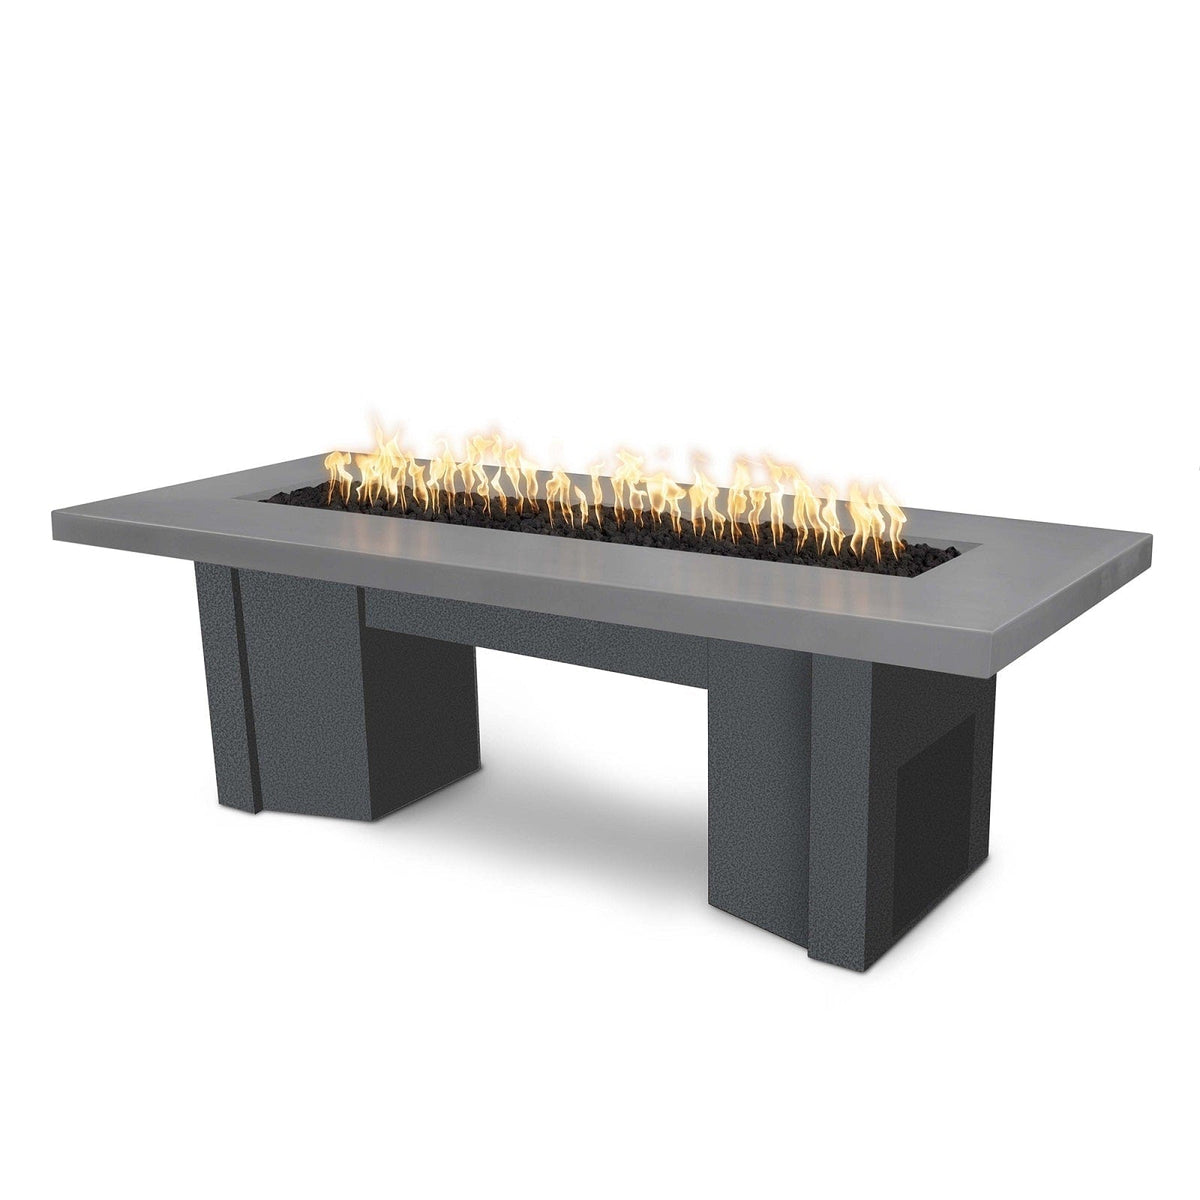 The Outdoor Plus Fire Features Natural Gray (-NGY) / Silver Vein Powder Coated Steel (-SLV) The Outdoor Plus 78&quot; Alameda Fire Table Smooth Concrete in Liquid Propane - Match Lit / OPT-ALMGFRC78-LP